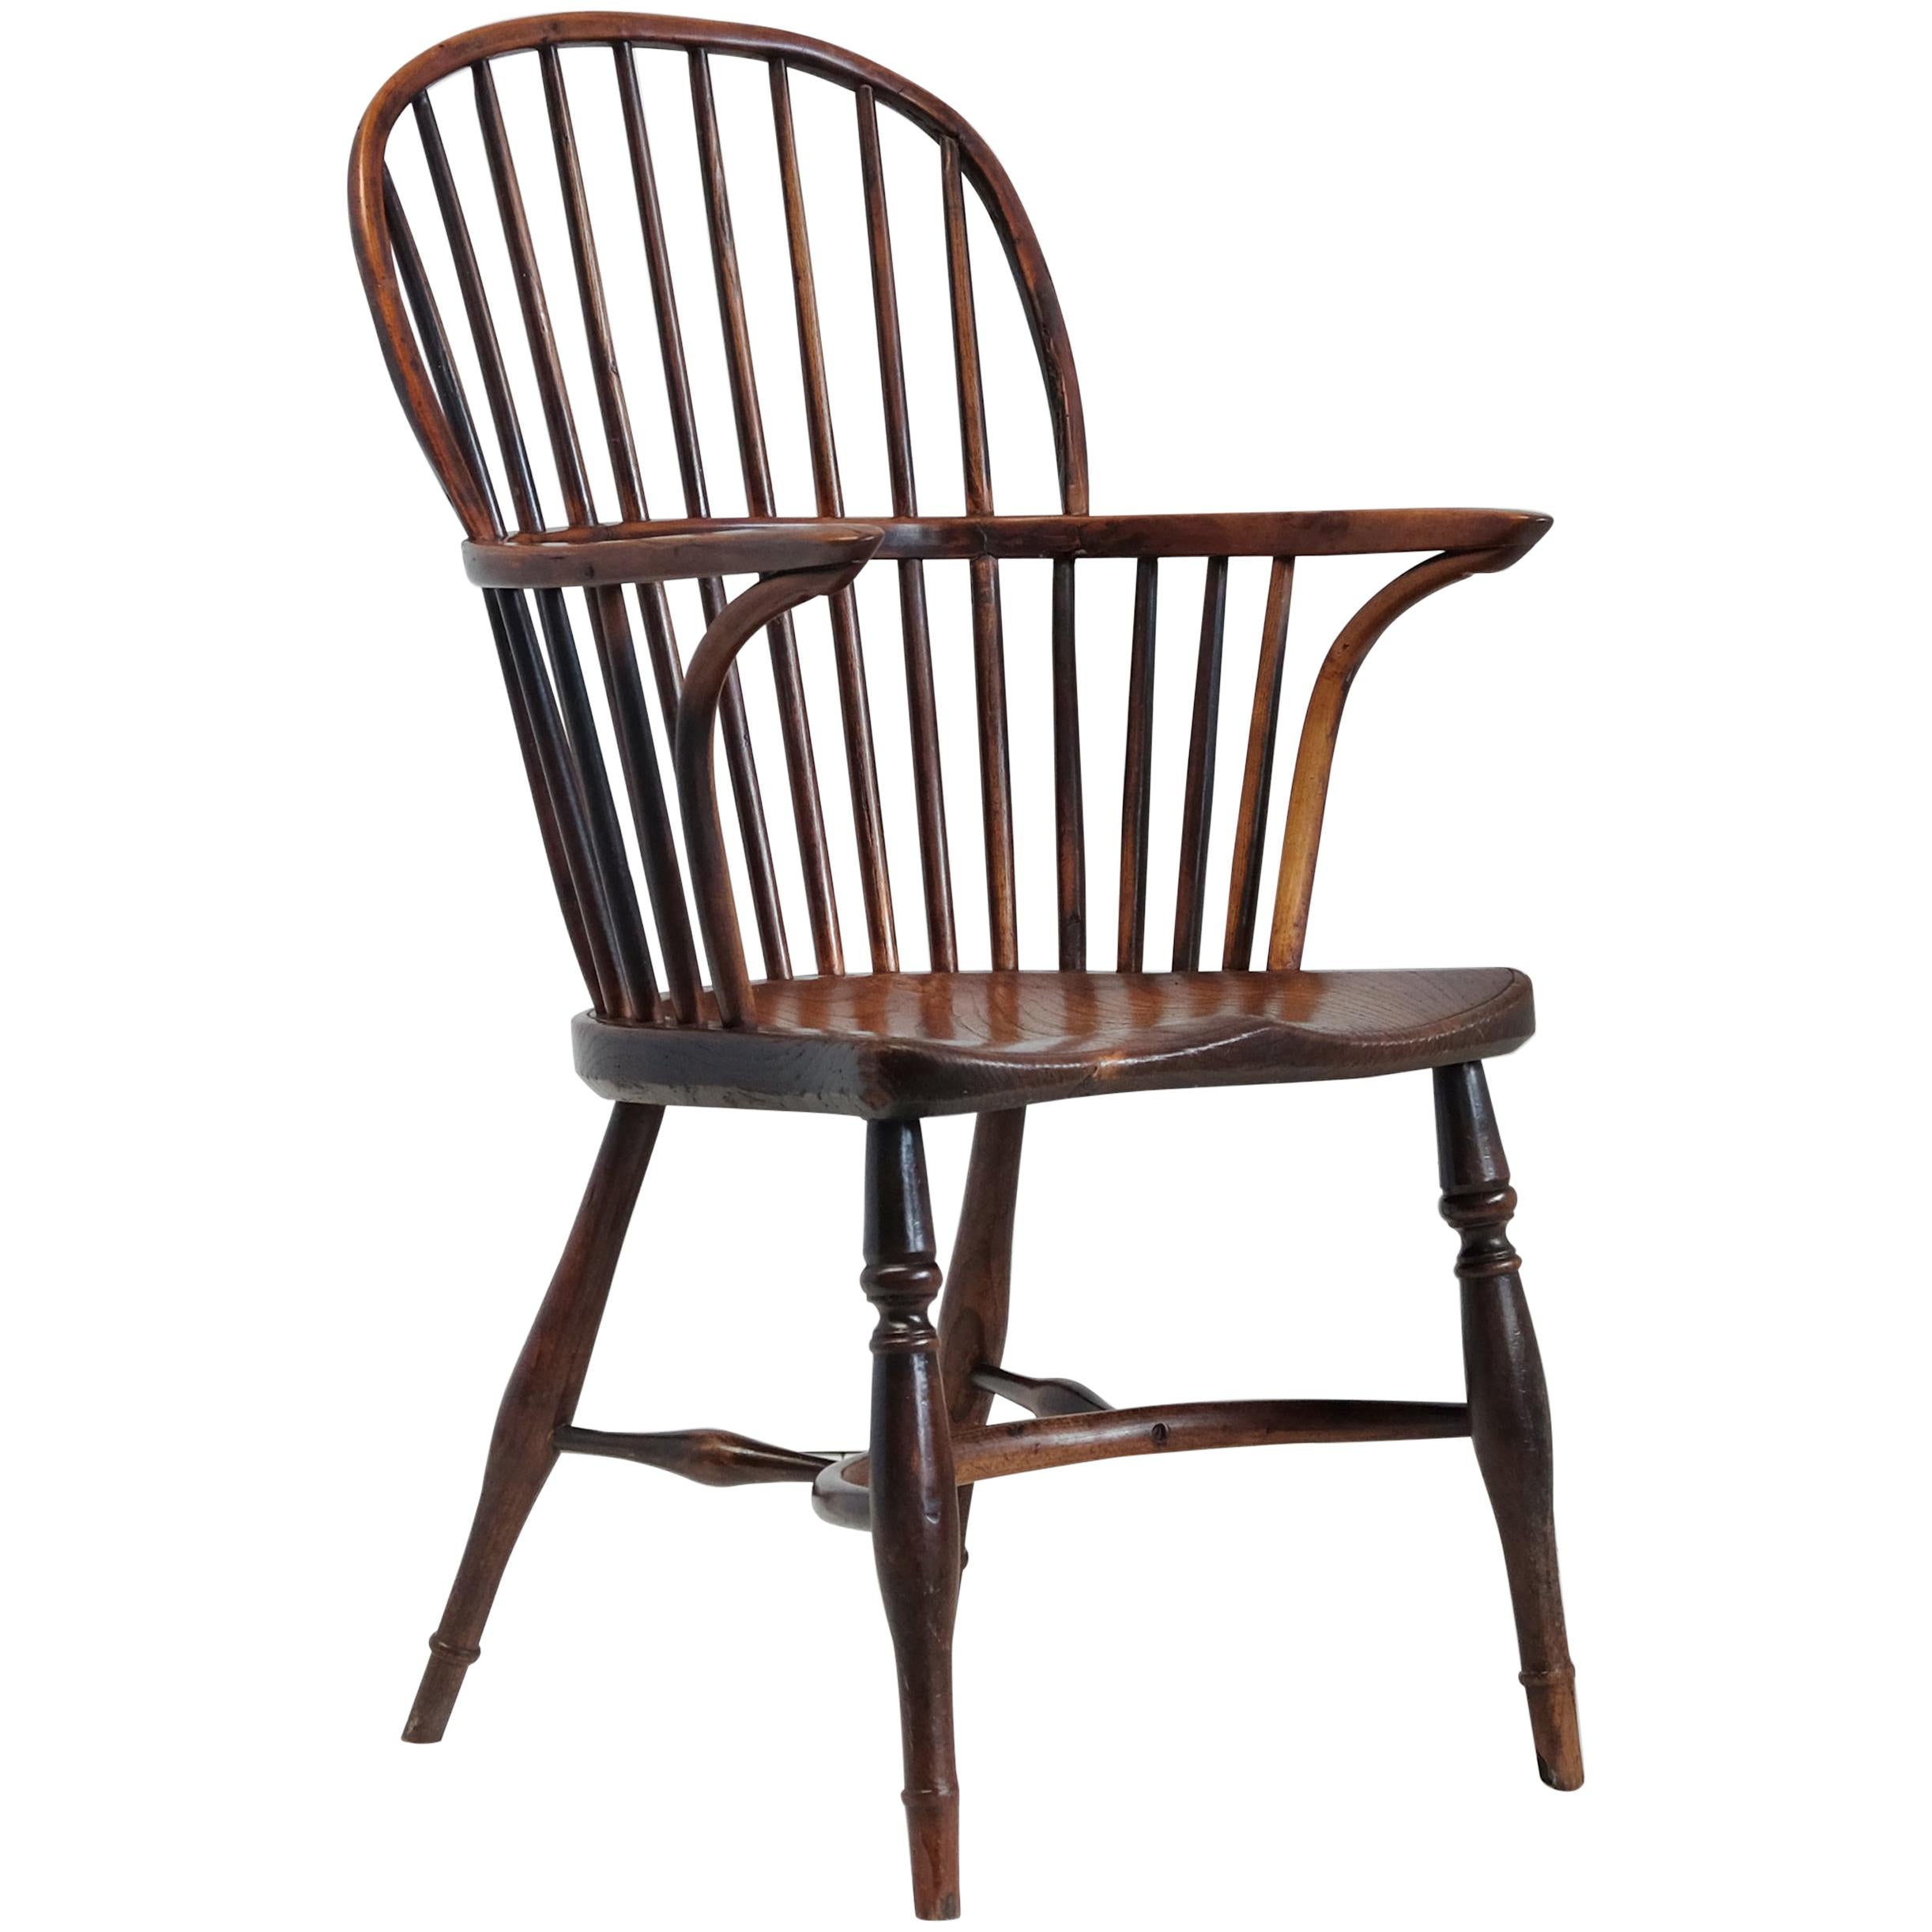 Yew Wood Stick Back, English Windsor Chair, 19th Century, Lincolnshire Hoop Back